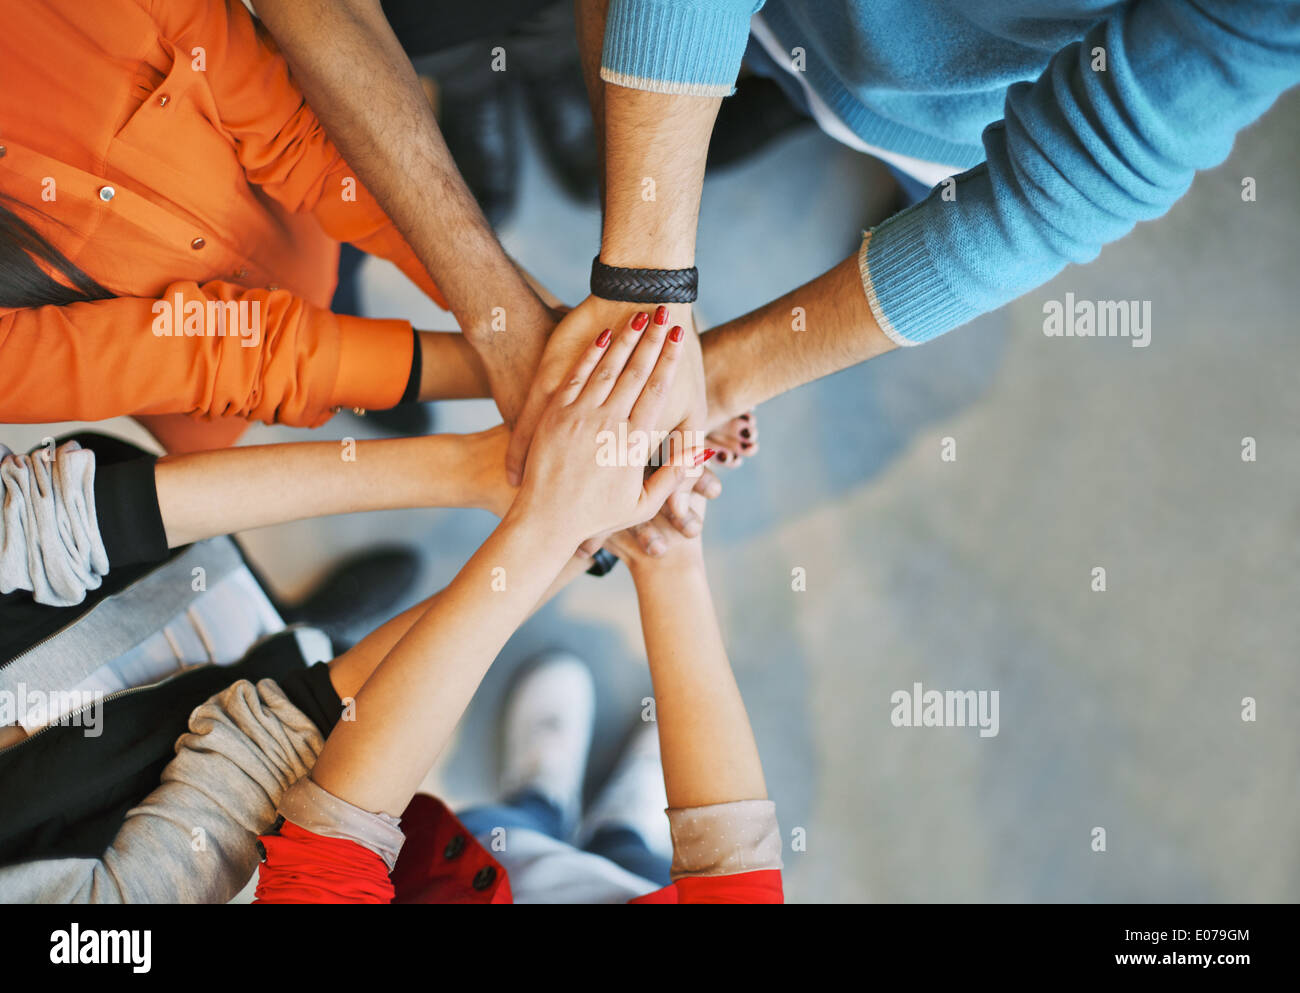 Top view image of group of young people putting their hands together. Friends with stack of hands showing unity. Stock Photo